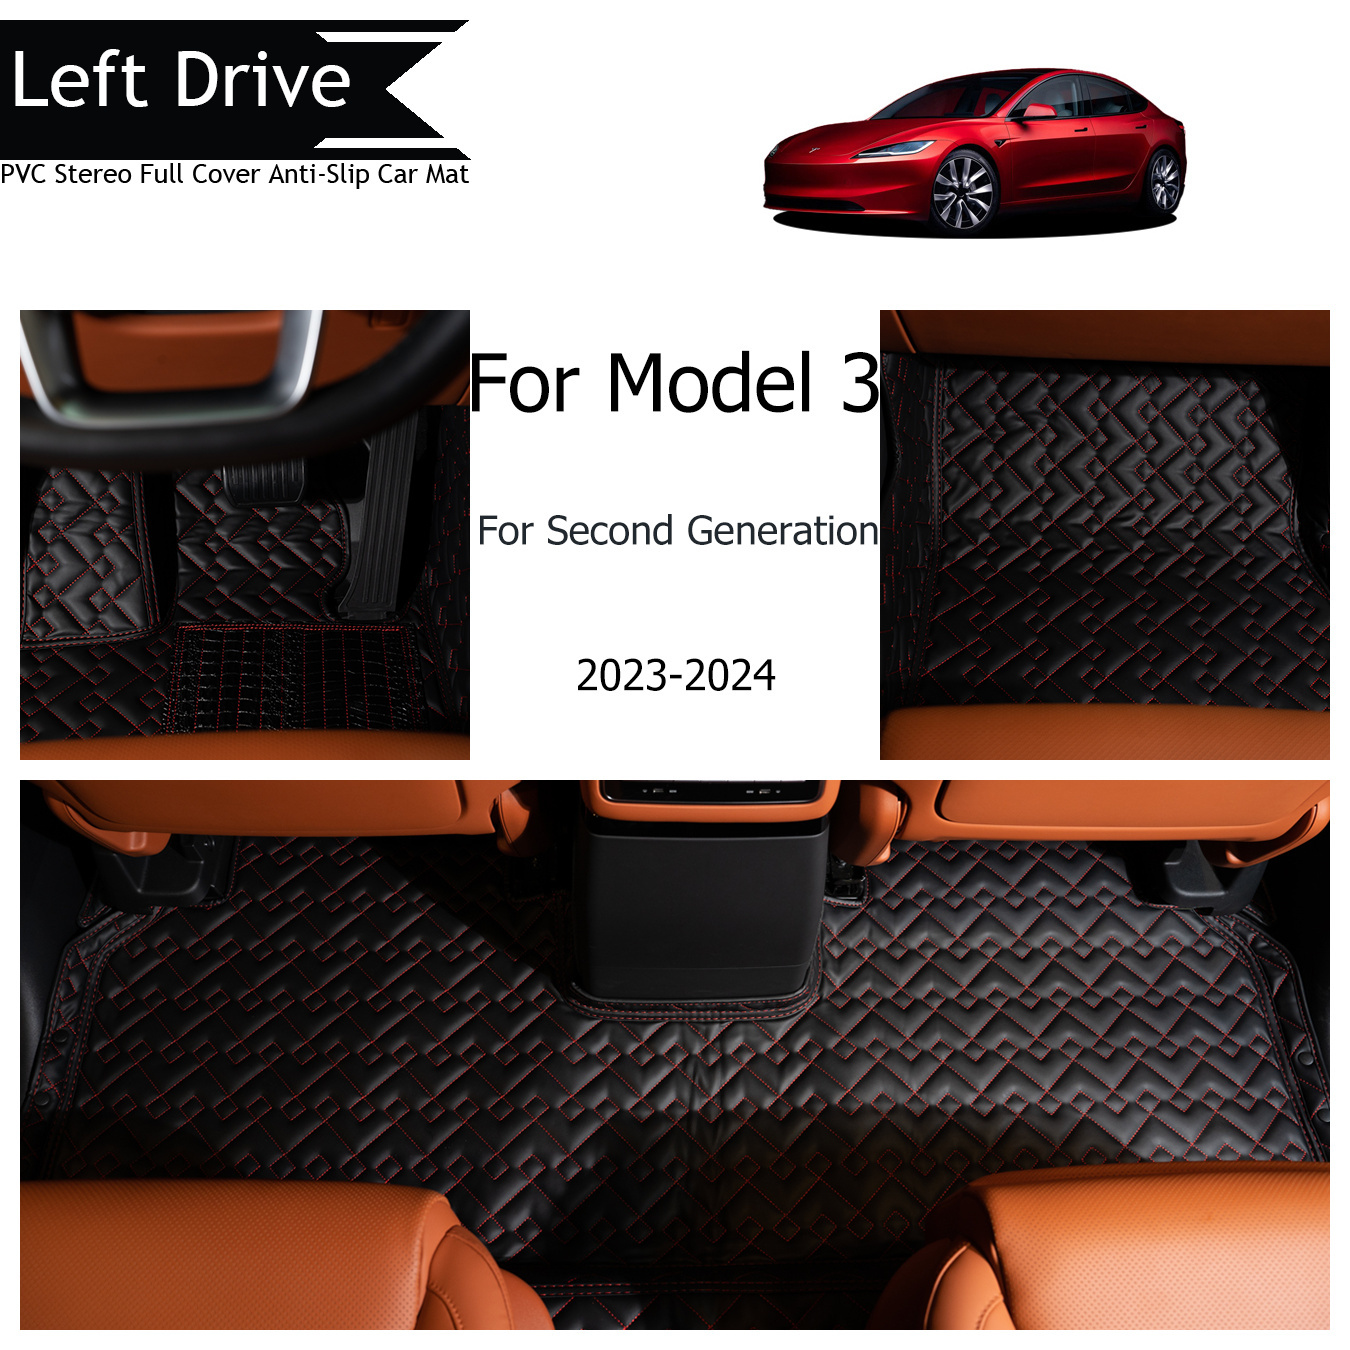 Tegart 【lhd】for For Model 3 2023-2024 Three Layer Pvc Stereo